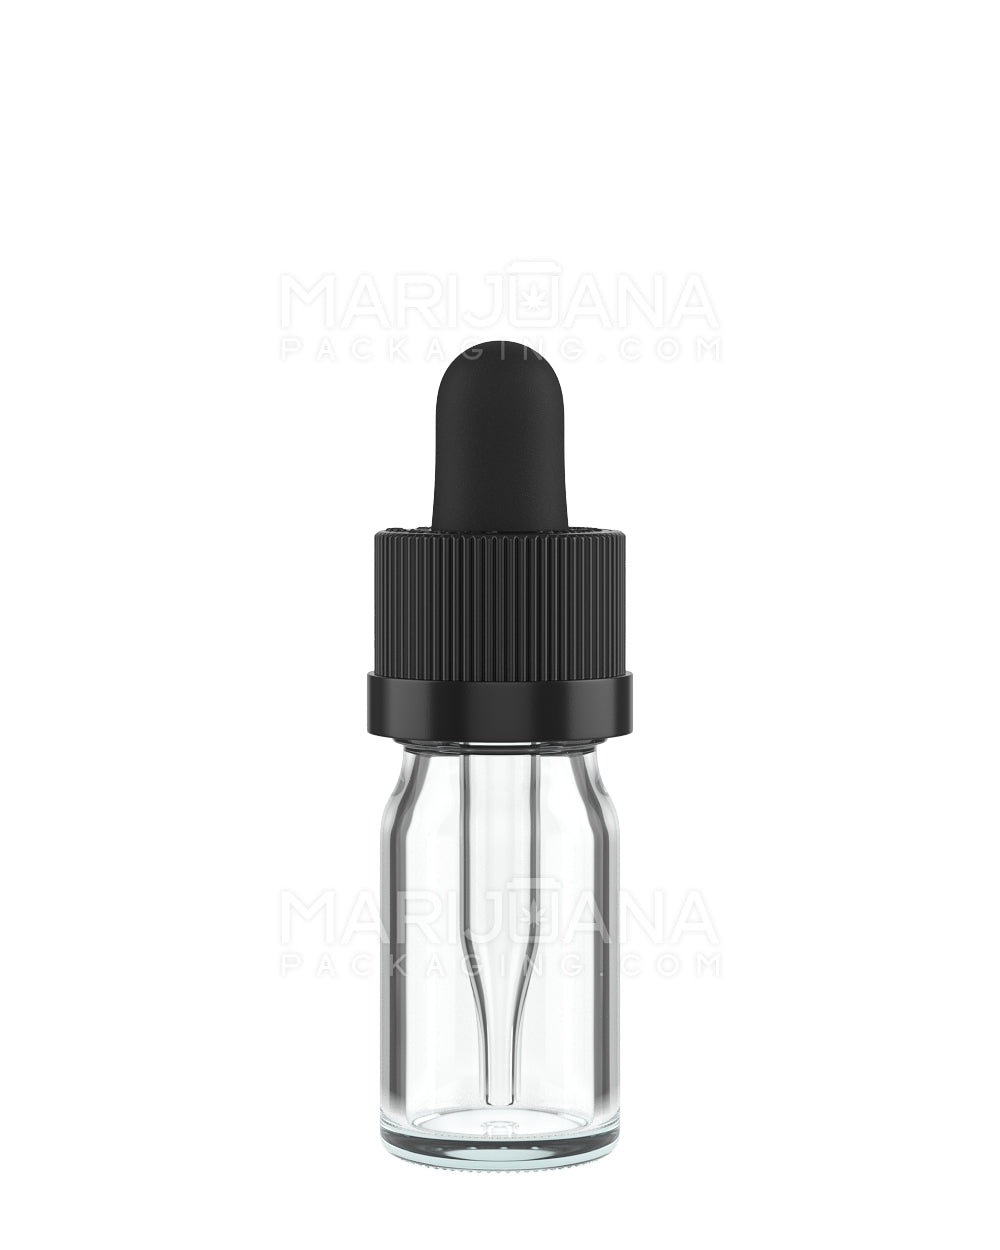 Child Resistant | Glass Tincture Bottles w/ Black Ribbed Dropper Cap | 5mL - Clear - 120 Count - 2